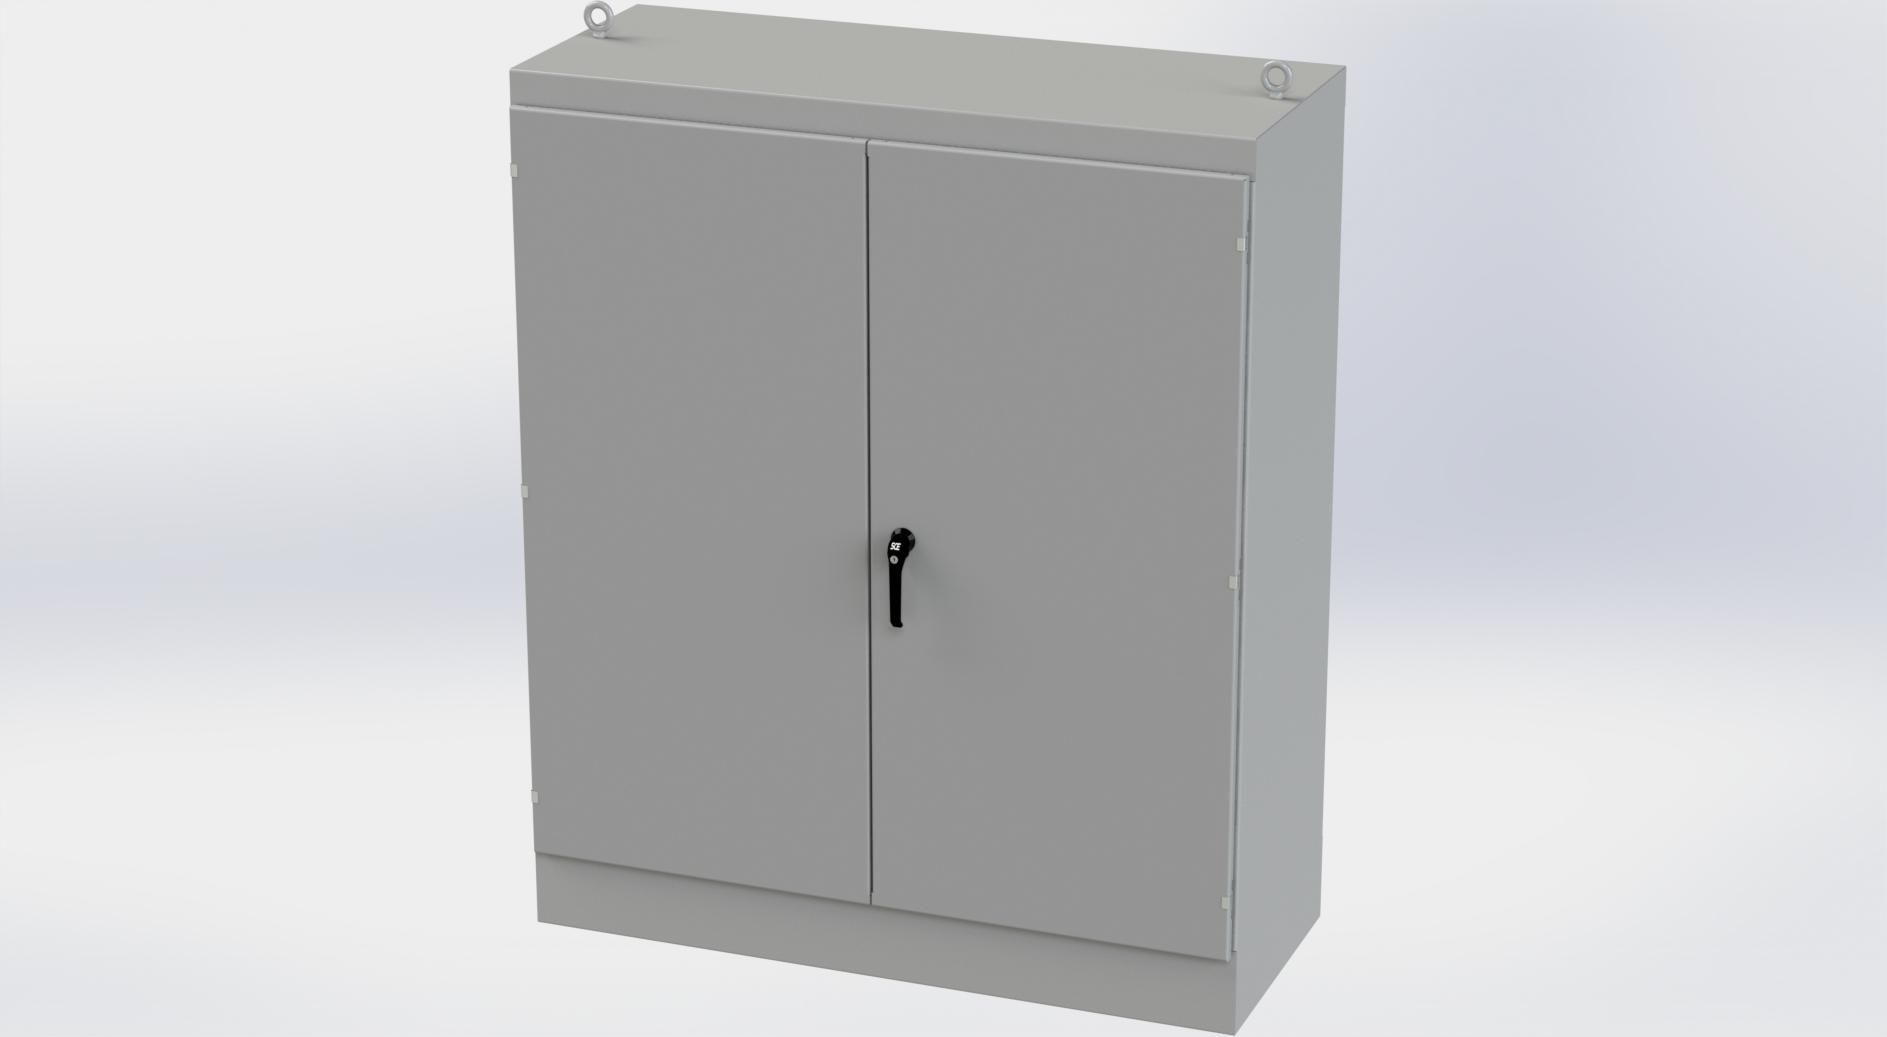 Saginaw Control SCE-726024FSDAD FSDAD Enclosure, Height:72.00", Width:60.00", Depth:24.00", ANSI-61 gray finish inside and out. Optional sub-panels are powder coated white.